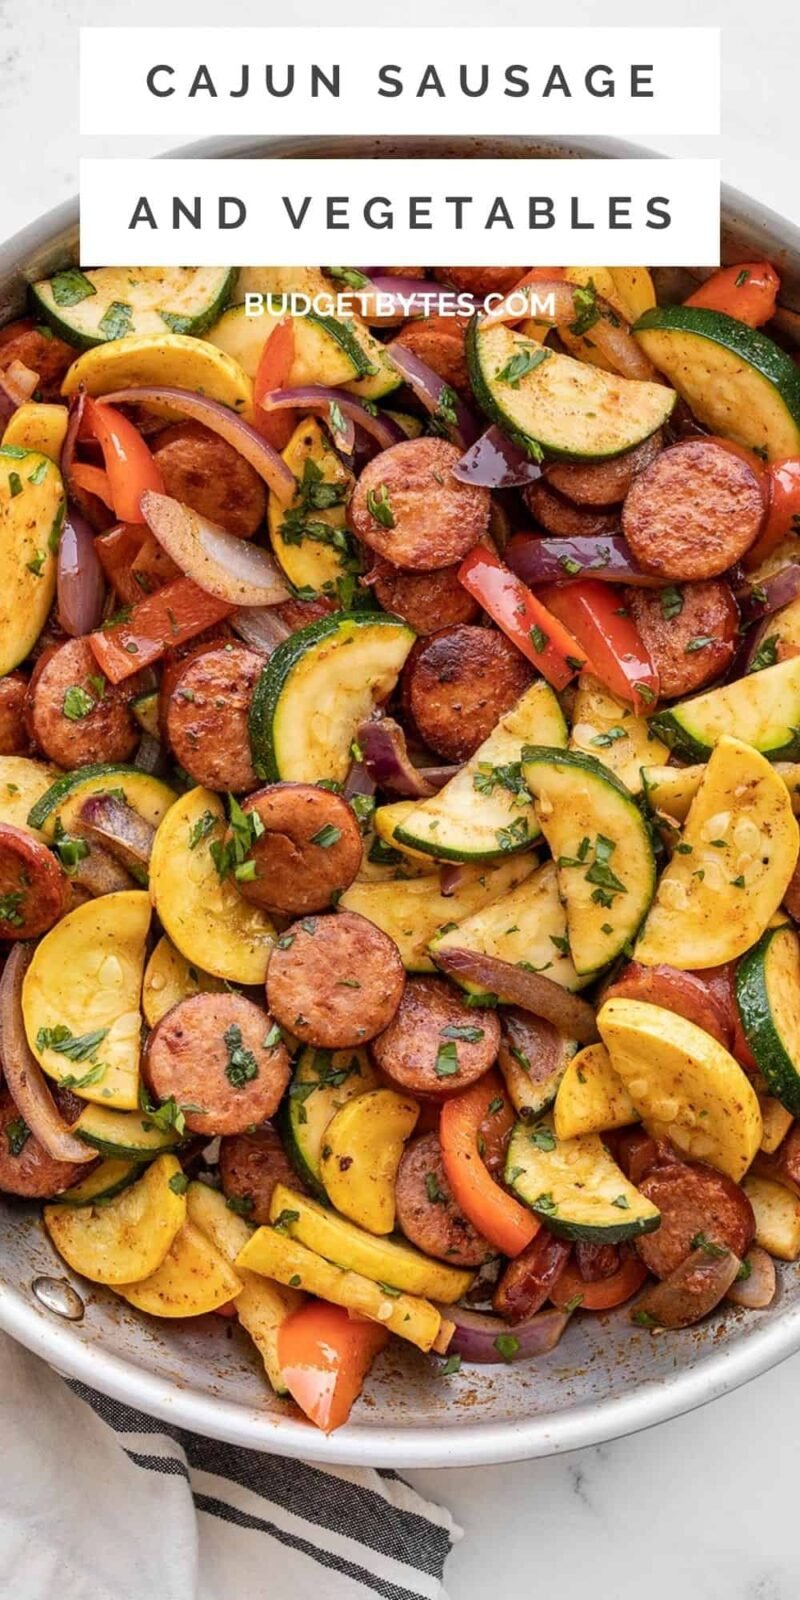 Cajun sausage and vegetables in a skillet